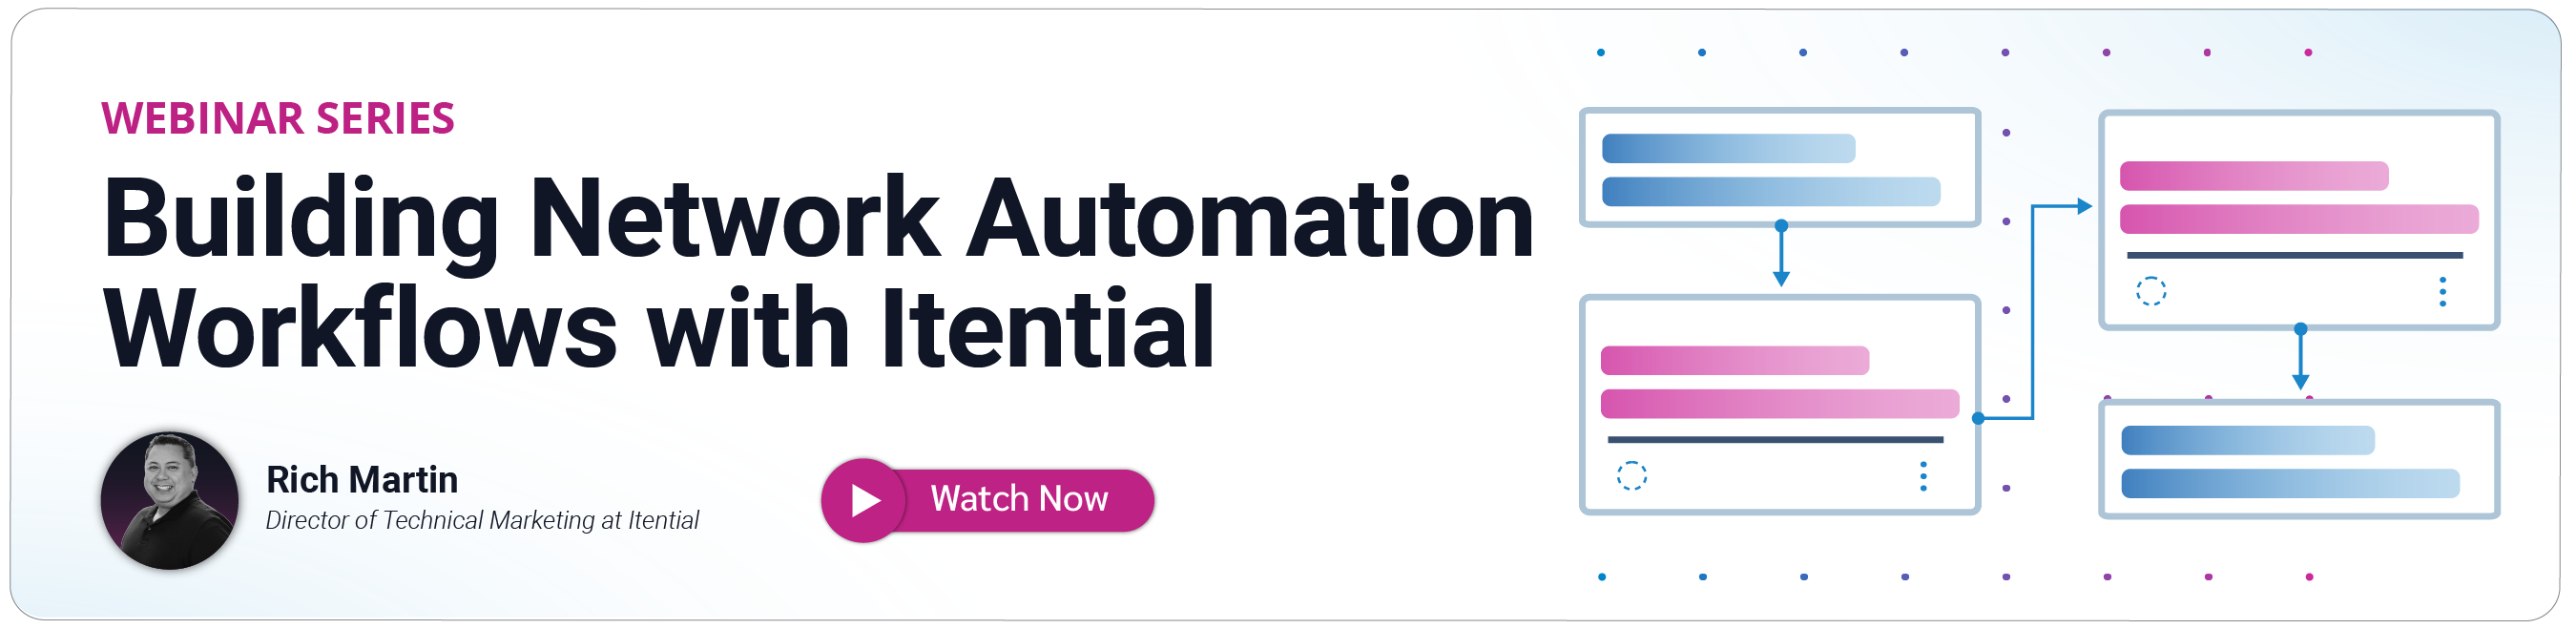 DEMO SERIES Building Network Automation Workflows with Itential